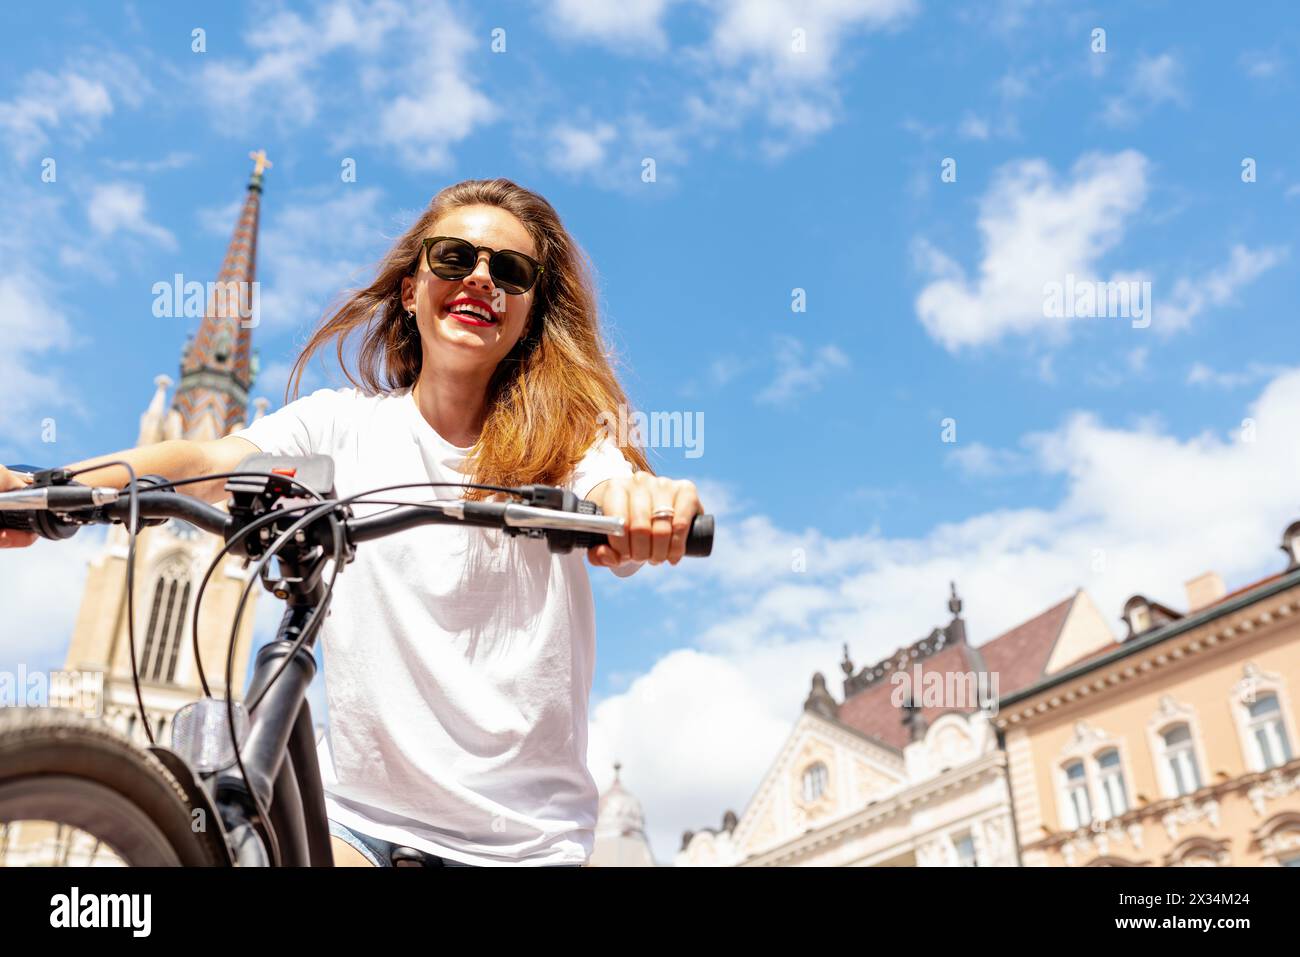 Carefree happy young woman traveling around the city on a bicycle. Summer active lifestyle. Stock Photo